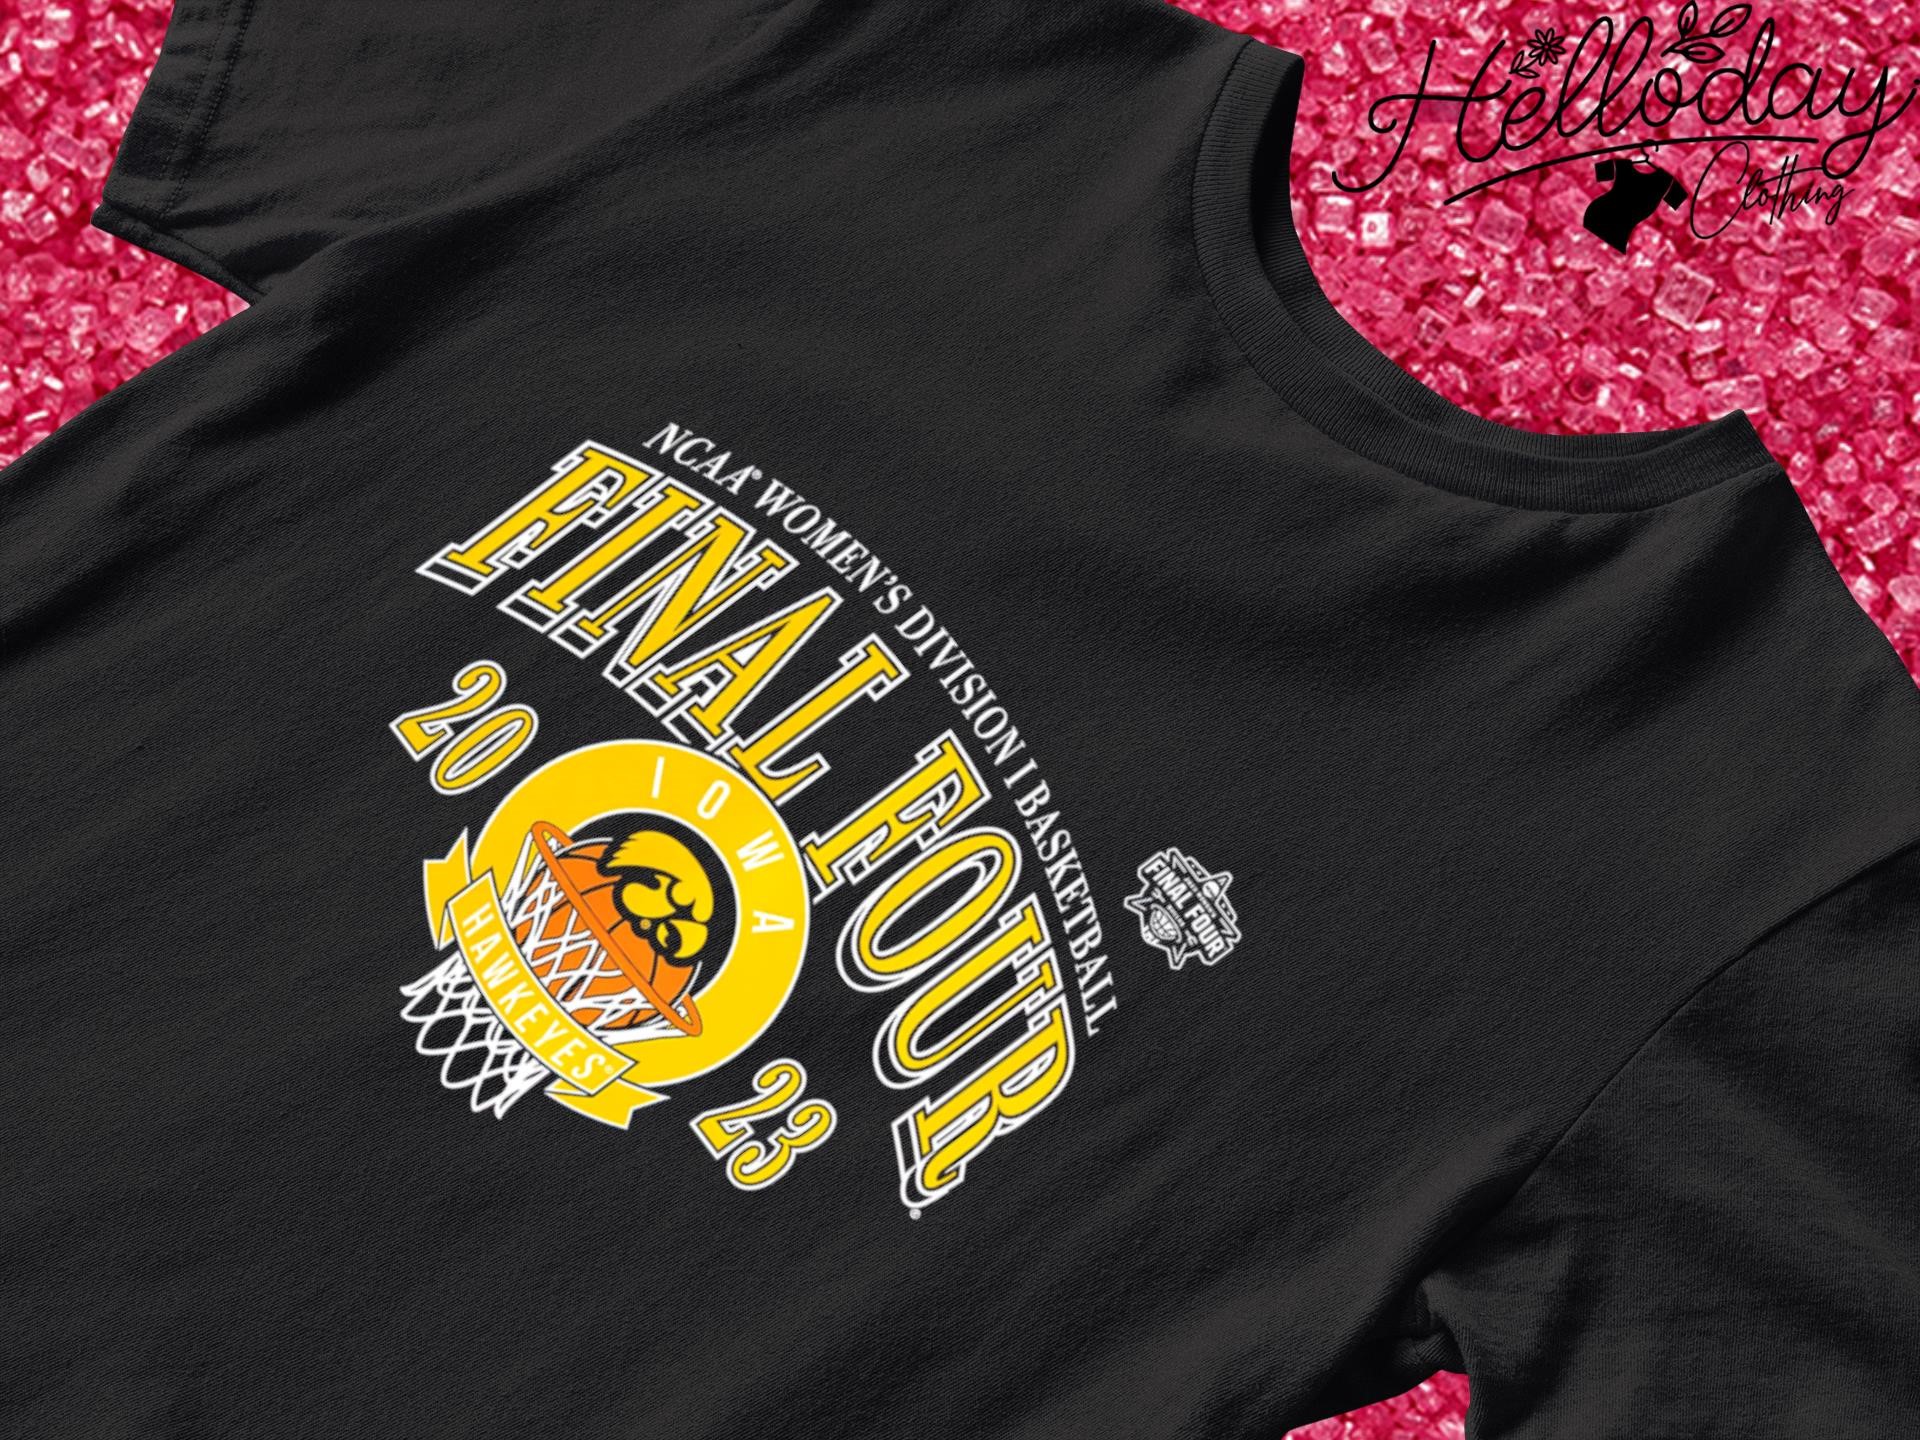 Iowa Hawkeyes NCAA Women's Division Basketball Final Four March Madness shirt